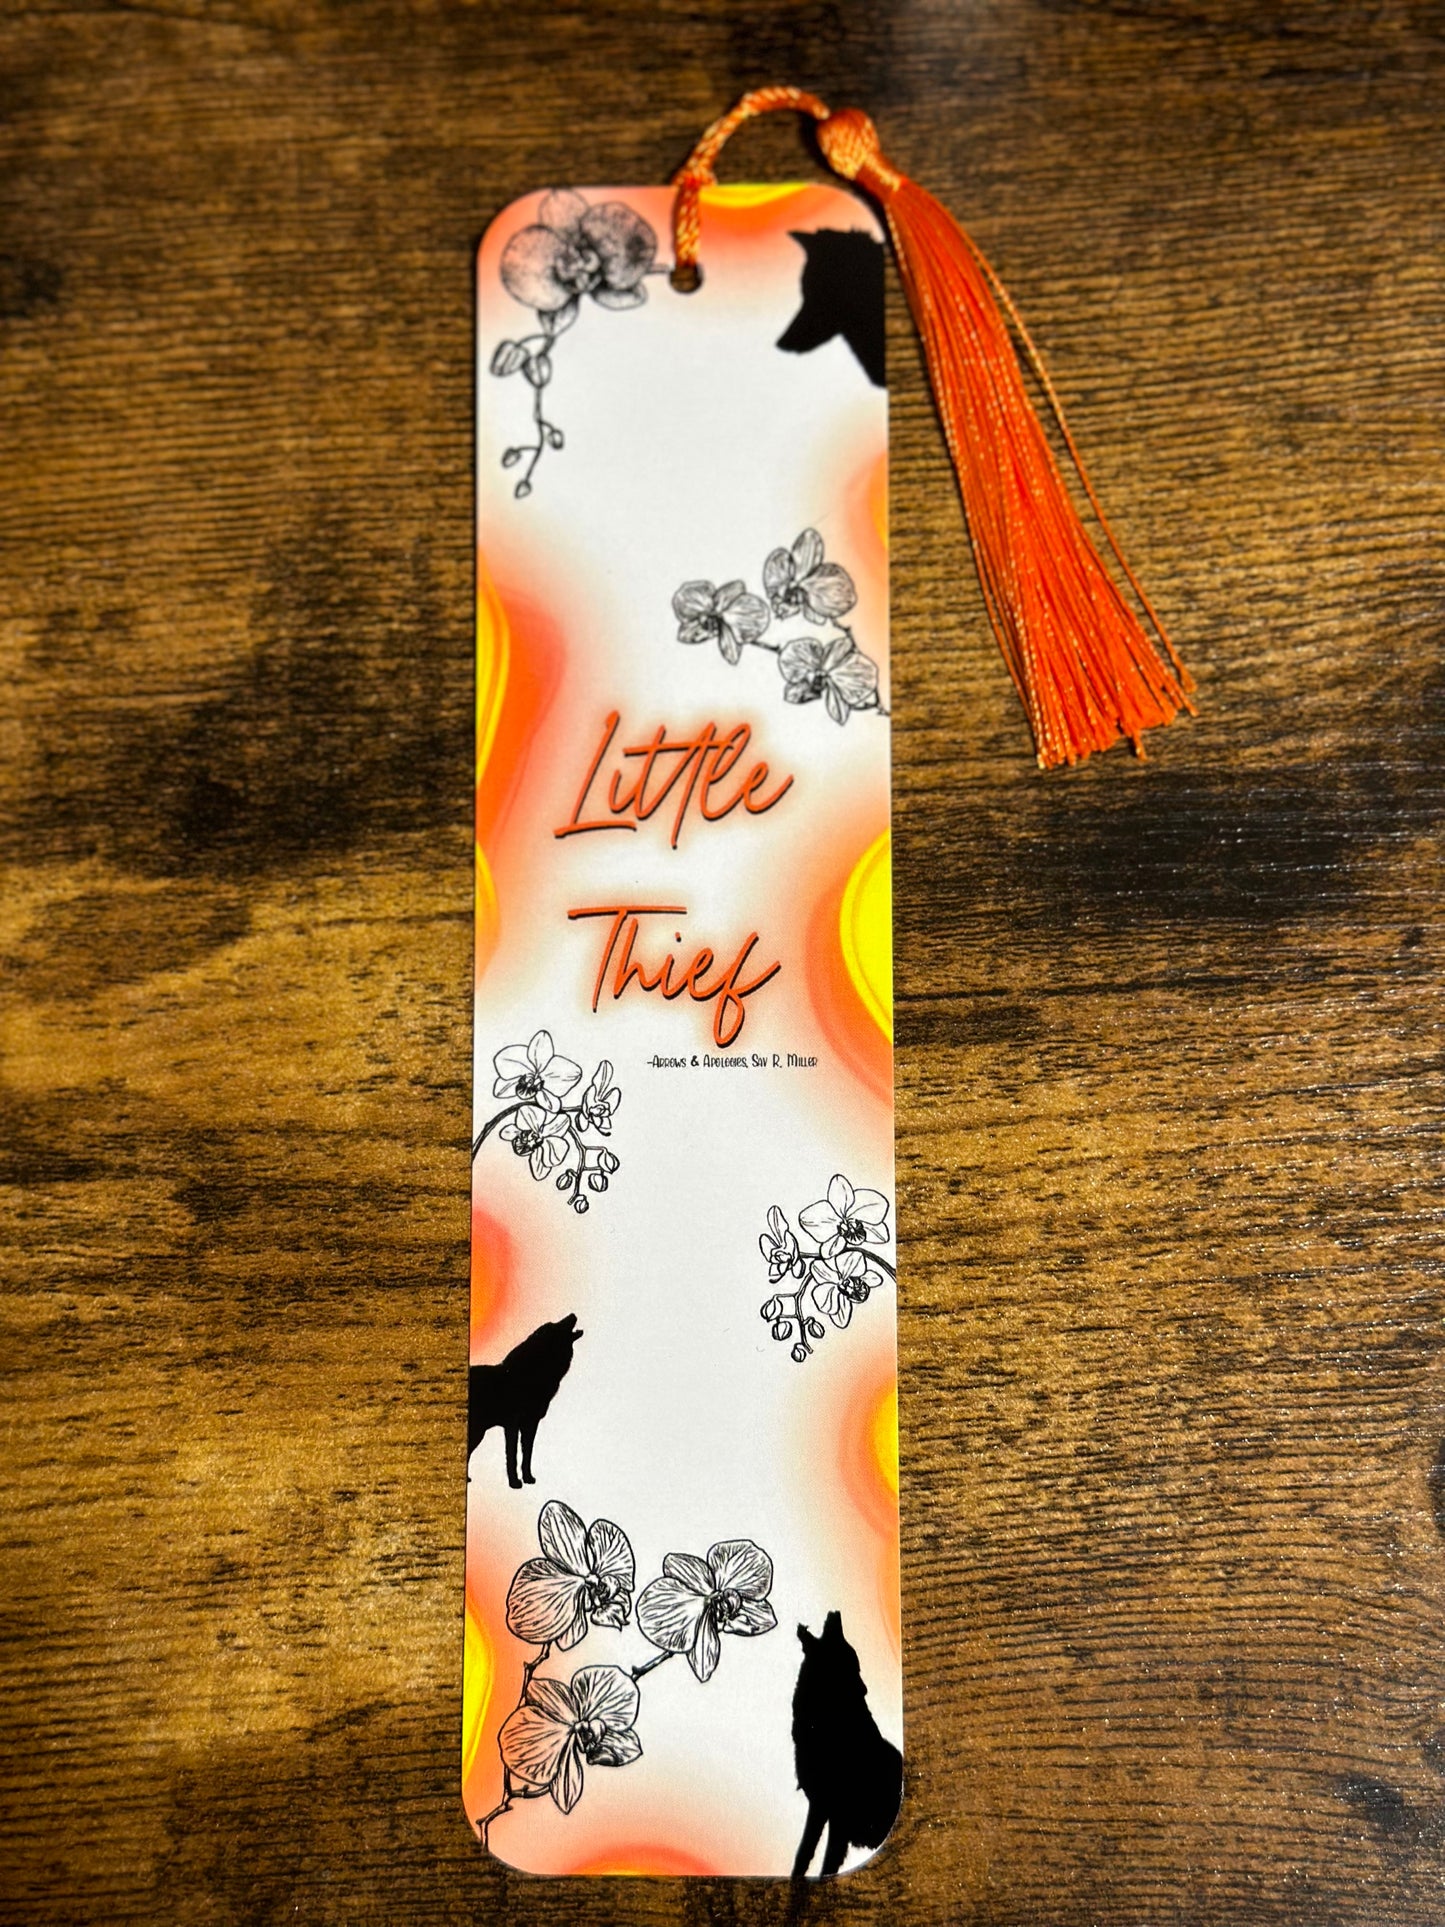 "Little Thief" Arrows and Apologies Bookmark